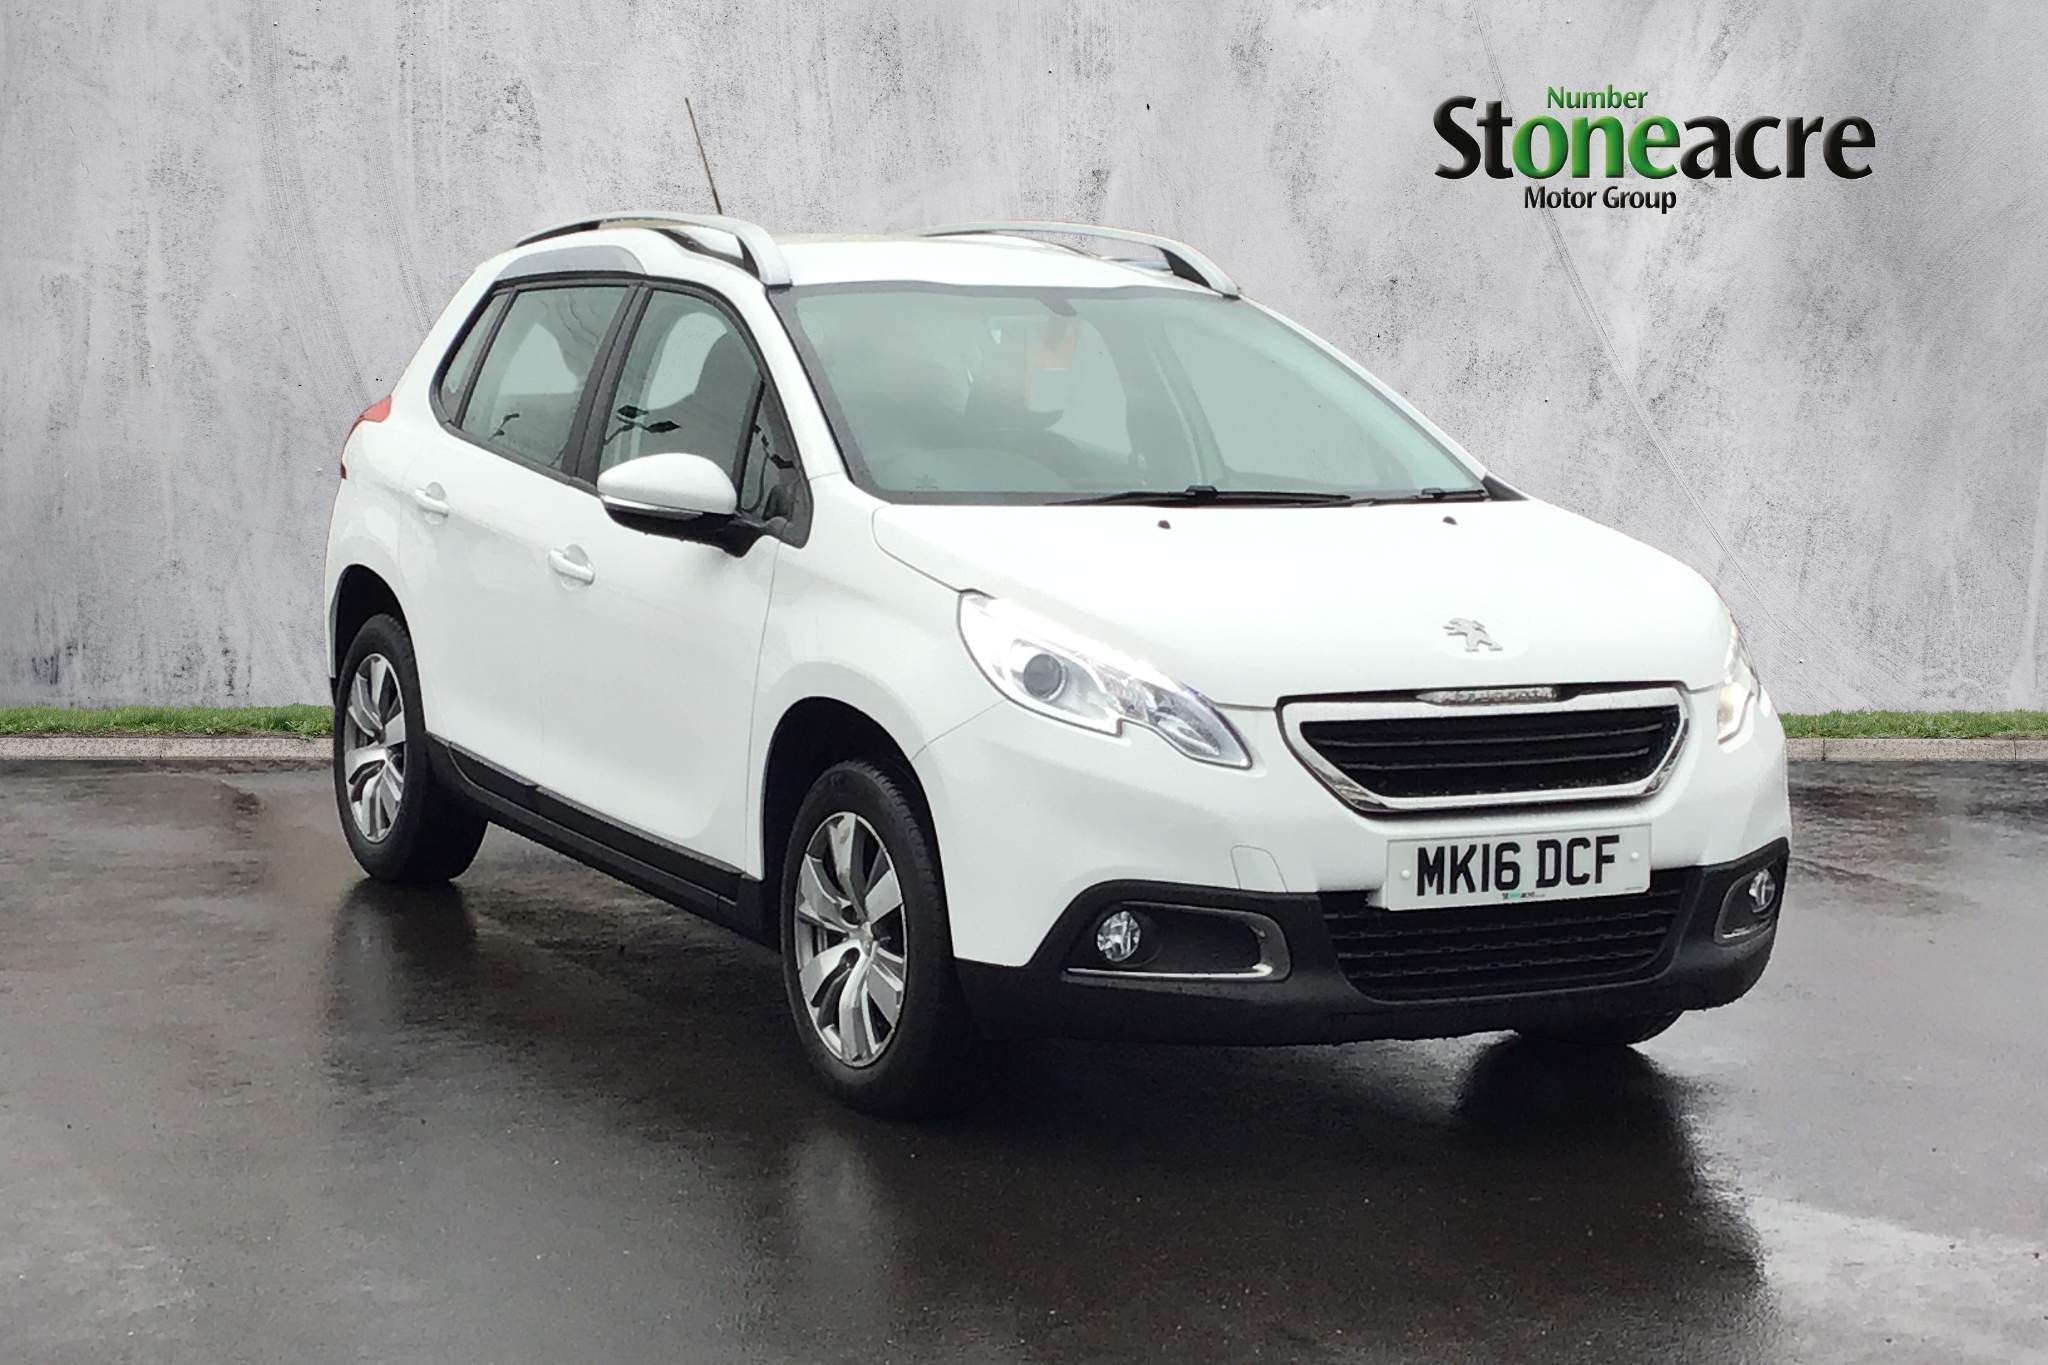 Used Peugeot Cars for Sale  Stoneacre